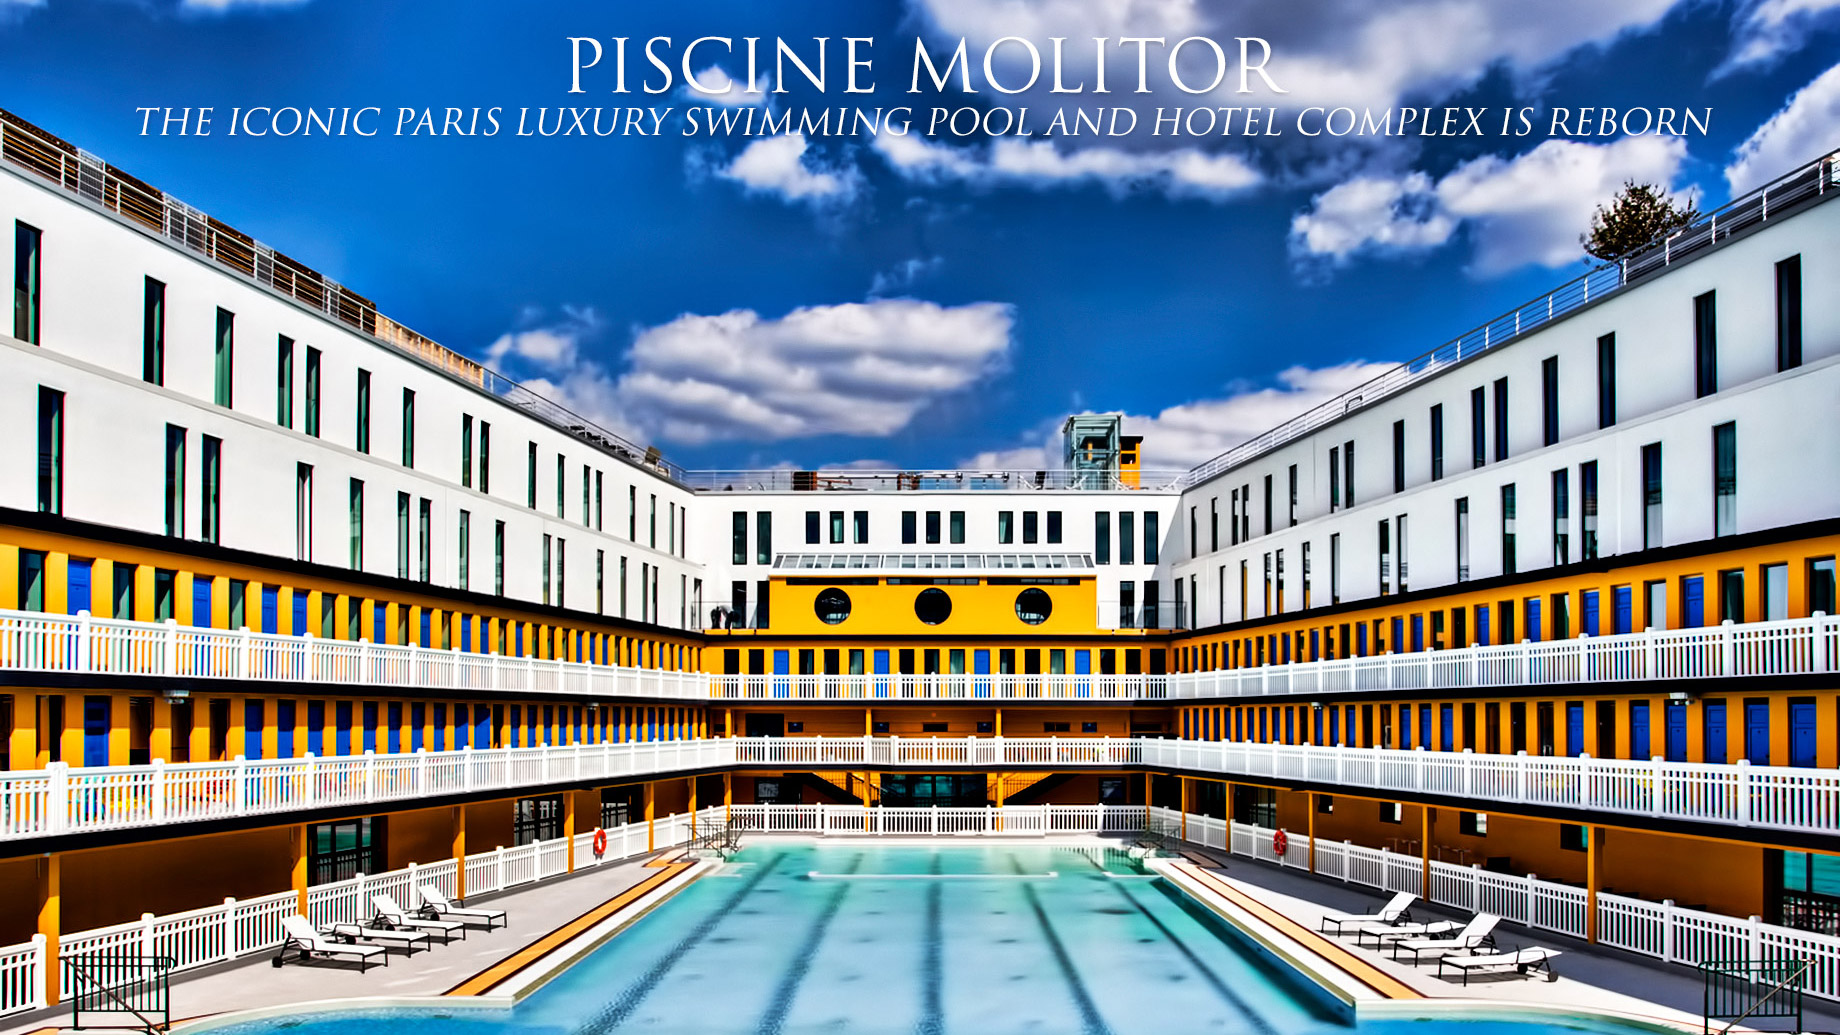 Piscine Molitor – The Iconic Paris Luxury Swimming Pool and Hotel Complex is Reborn